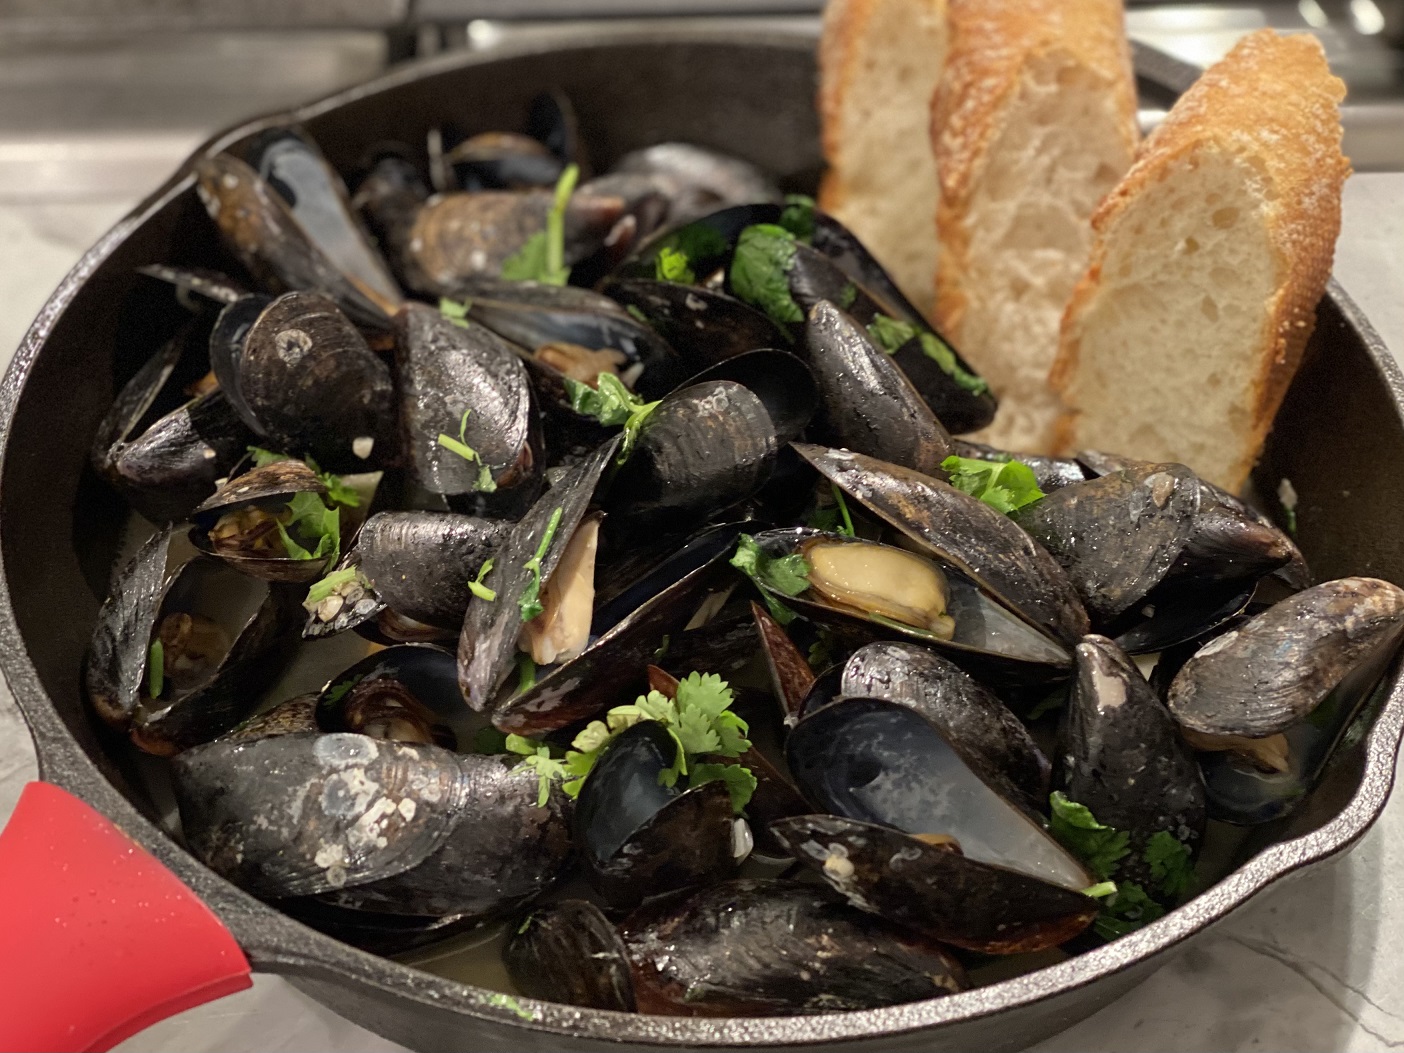 Steamed Mussels In White Wine Garlic Butter Sauce Recipe Rack Of Lam 